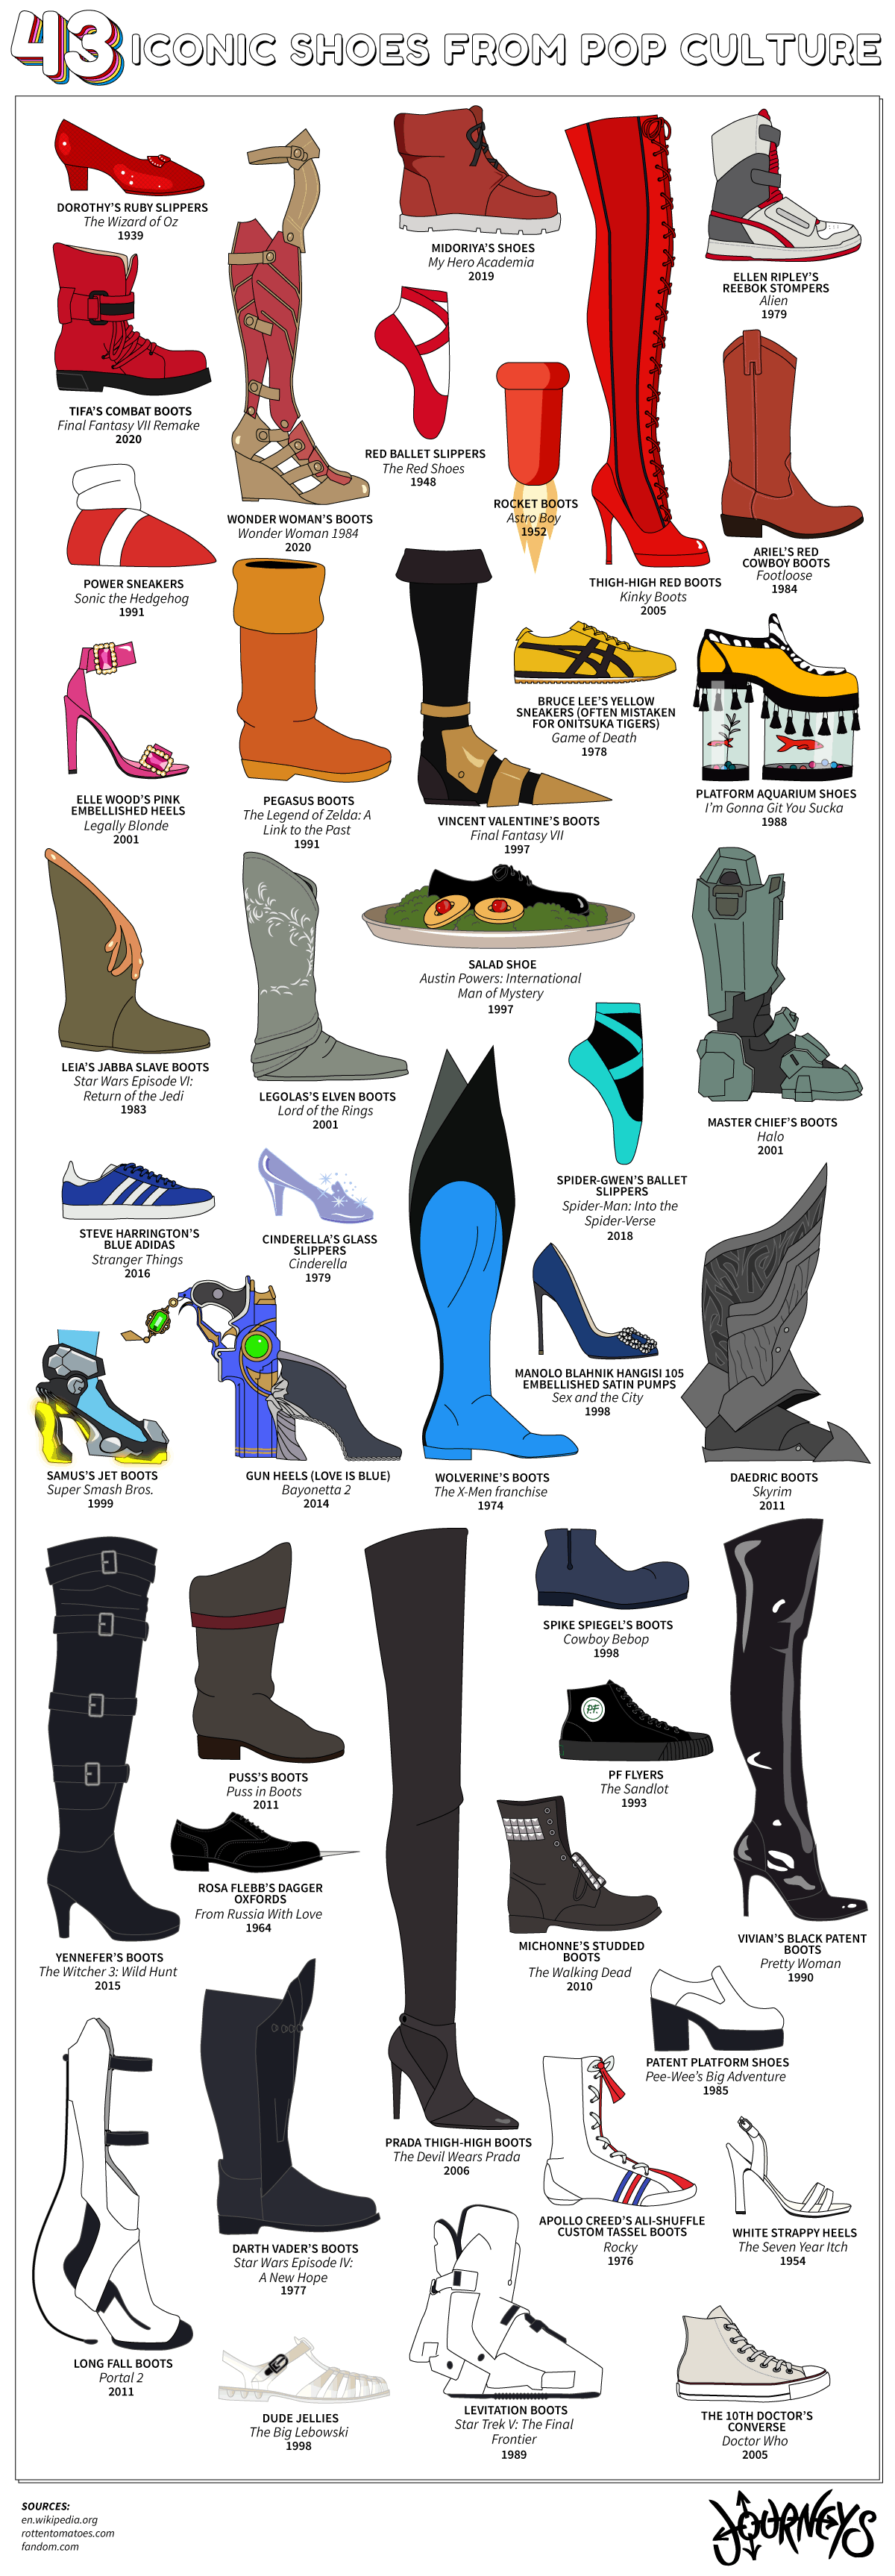 Explicitly Humanistic Continental Most Iconic Cinematic Footwear Of All Time | Daily Infographic